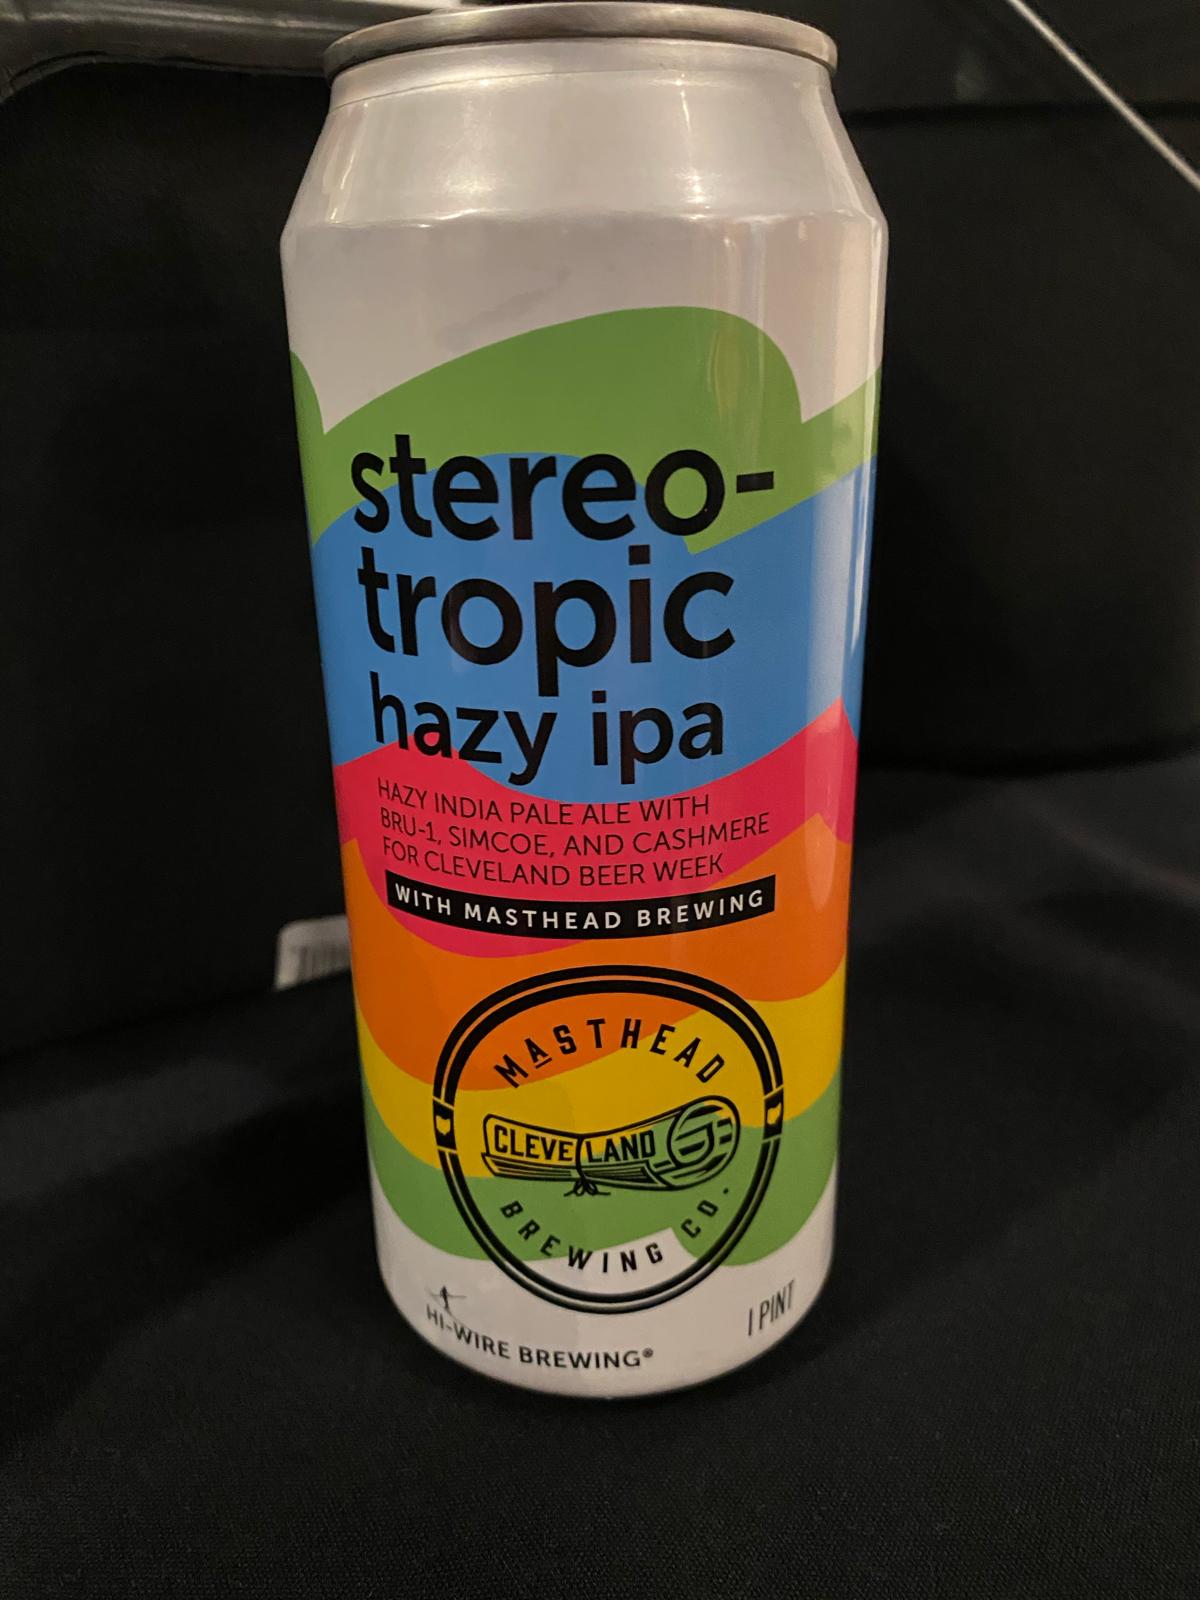 Stereotropic Hazy IPA (Collaboration with Masthead Brewing Co.)